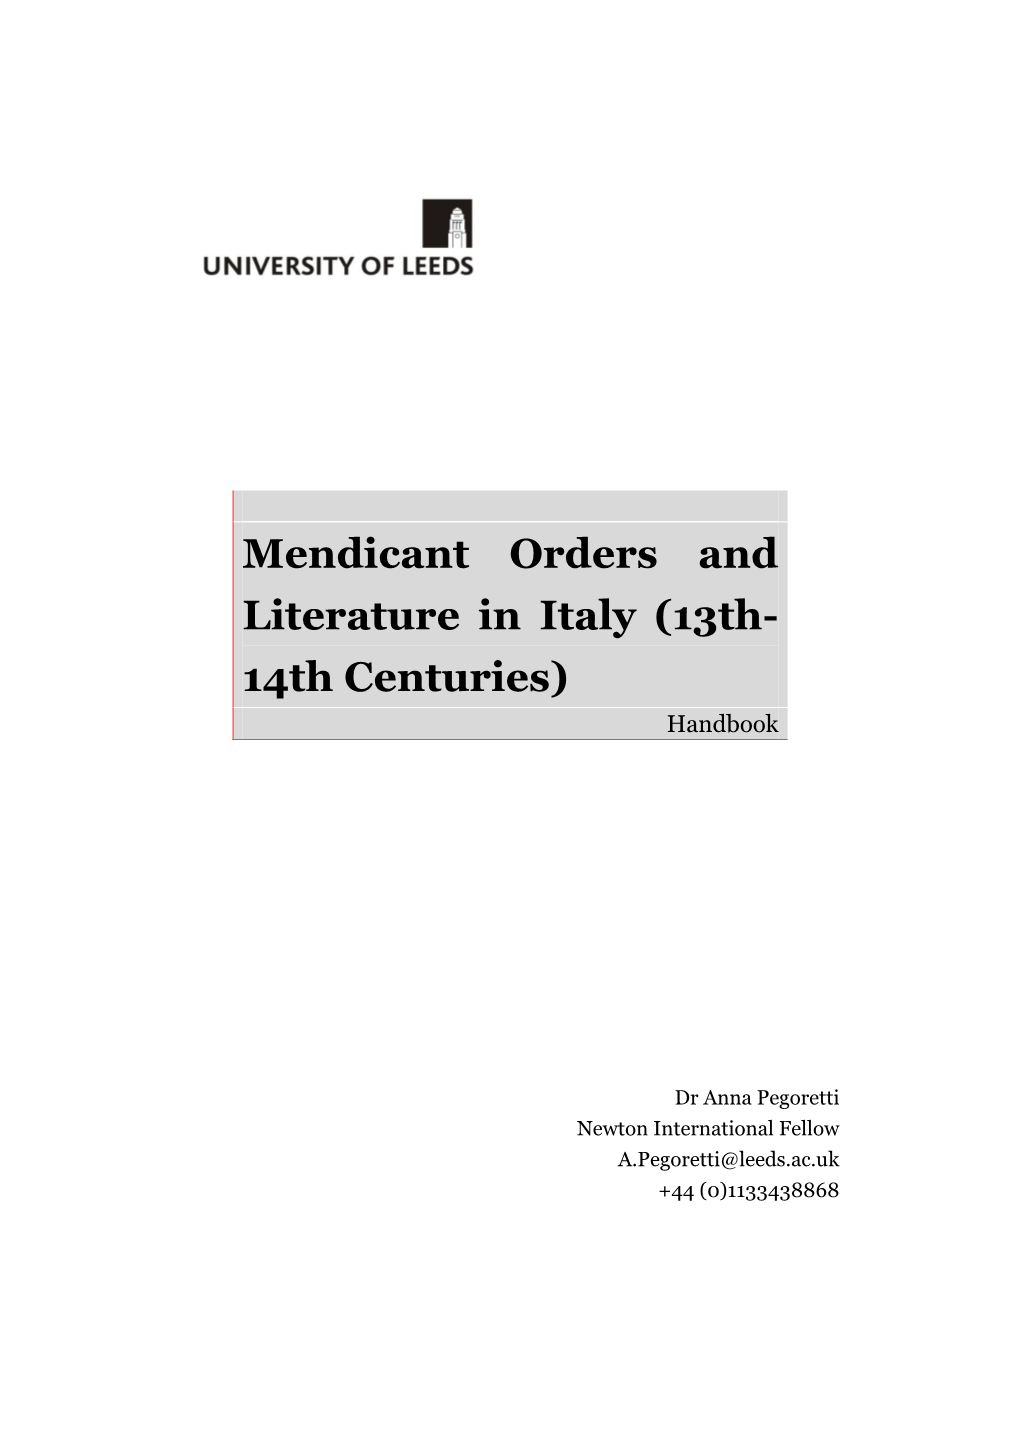 Mendicant Orders and Literature in Italy (13Th- 14Th Centuries) Handbook